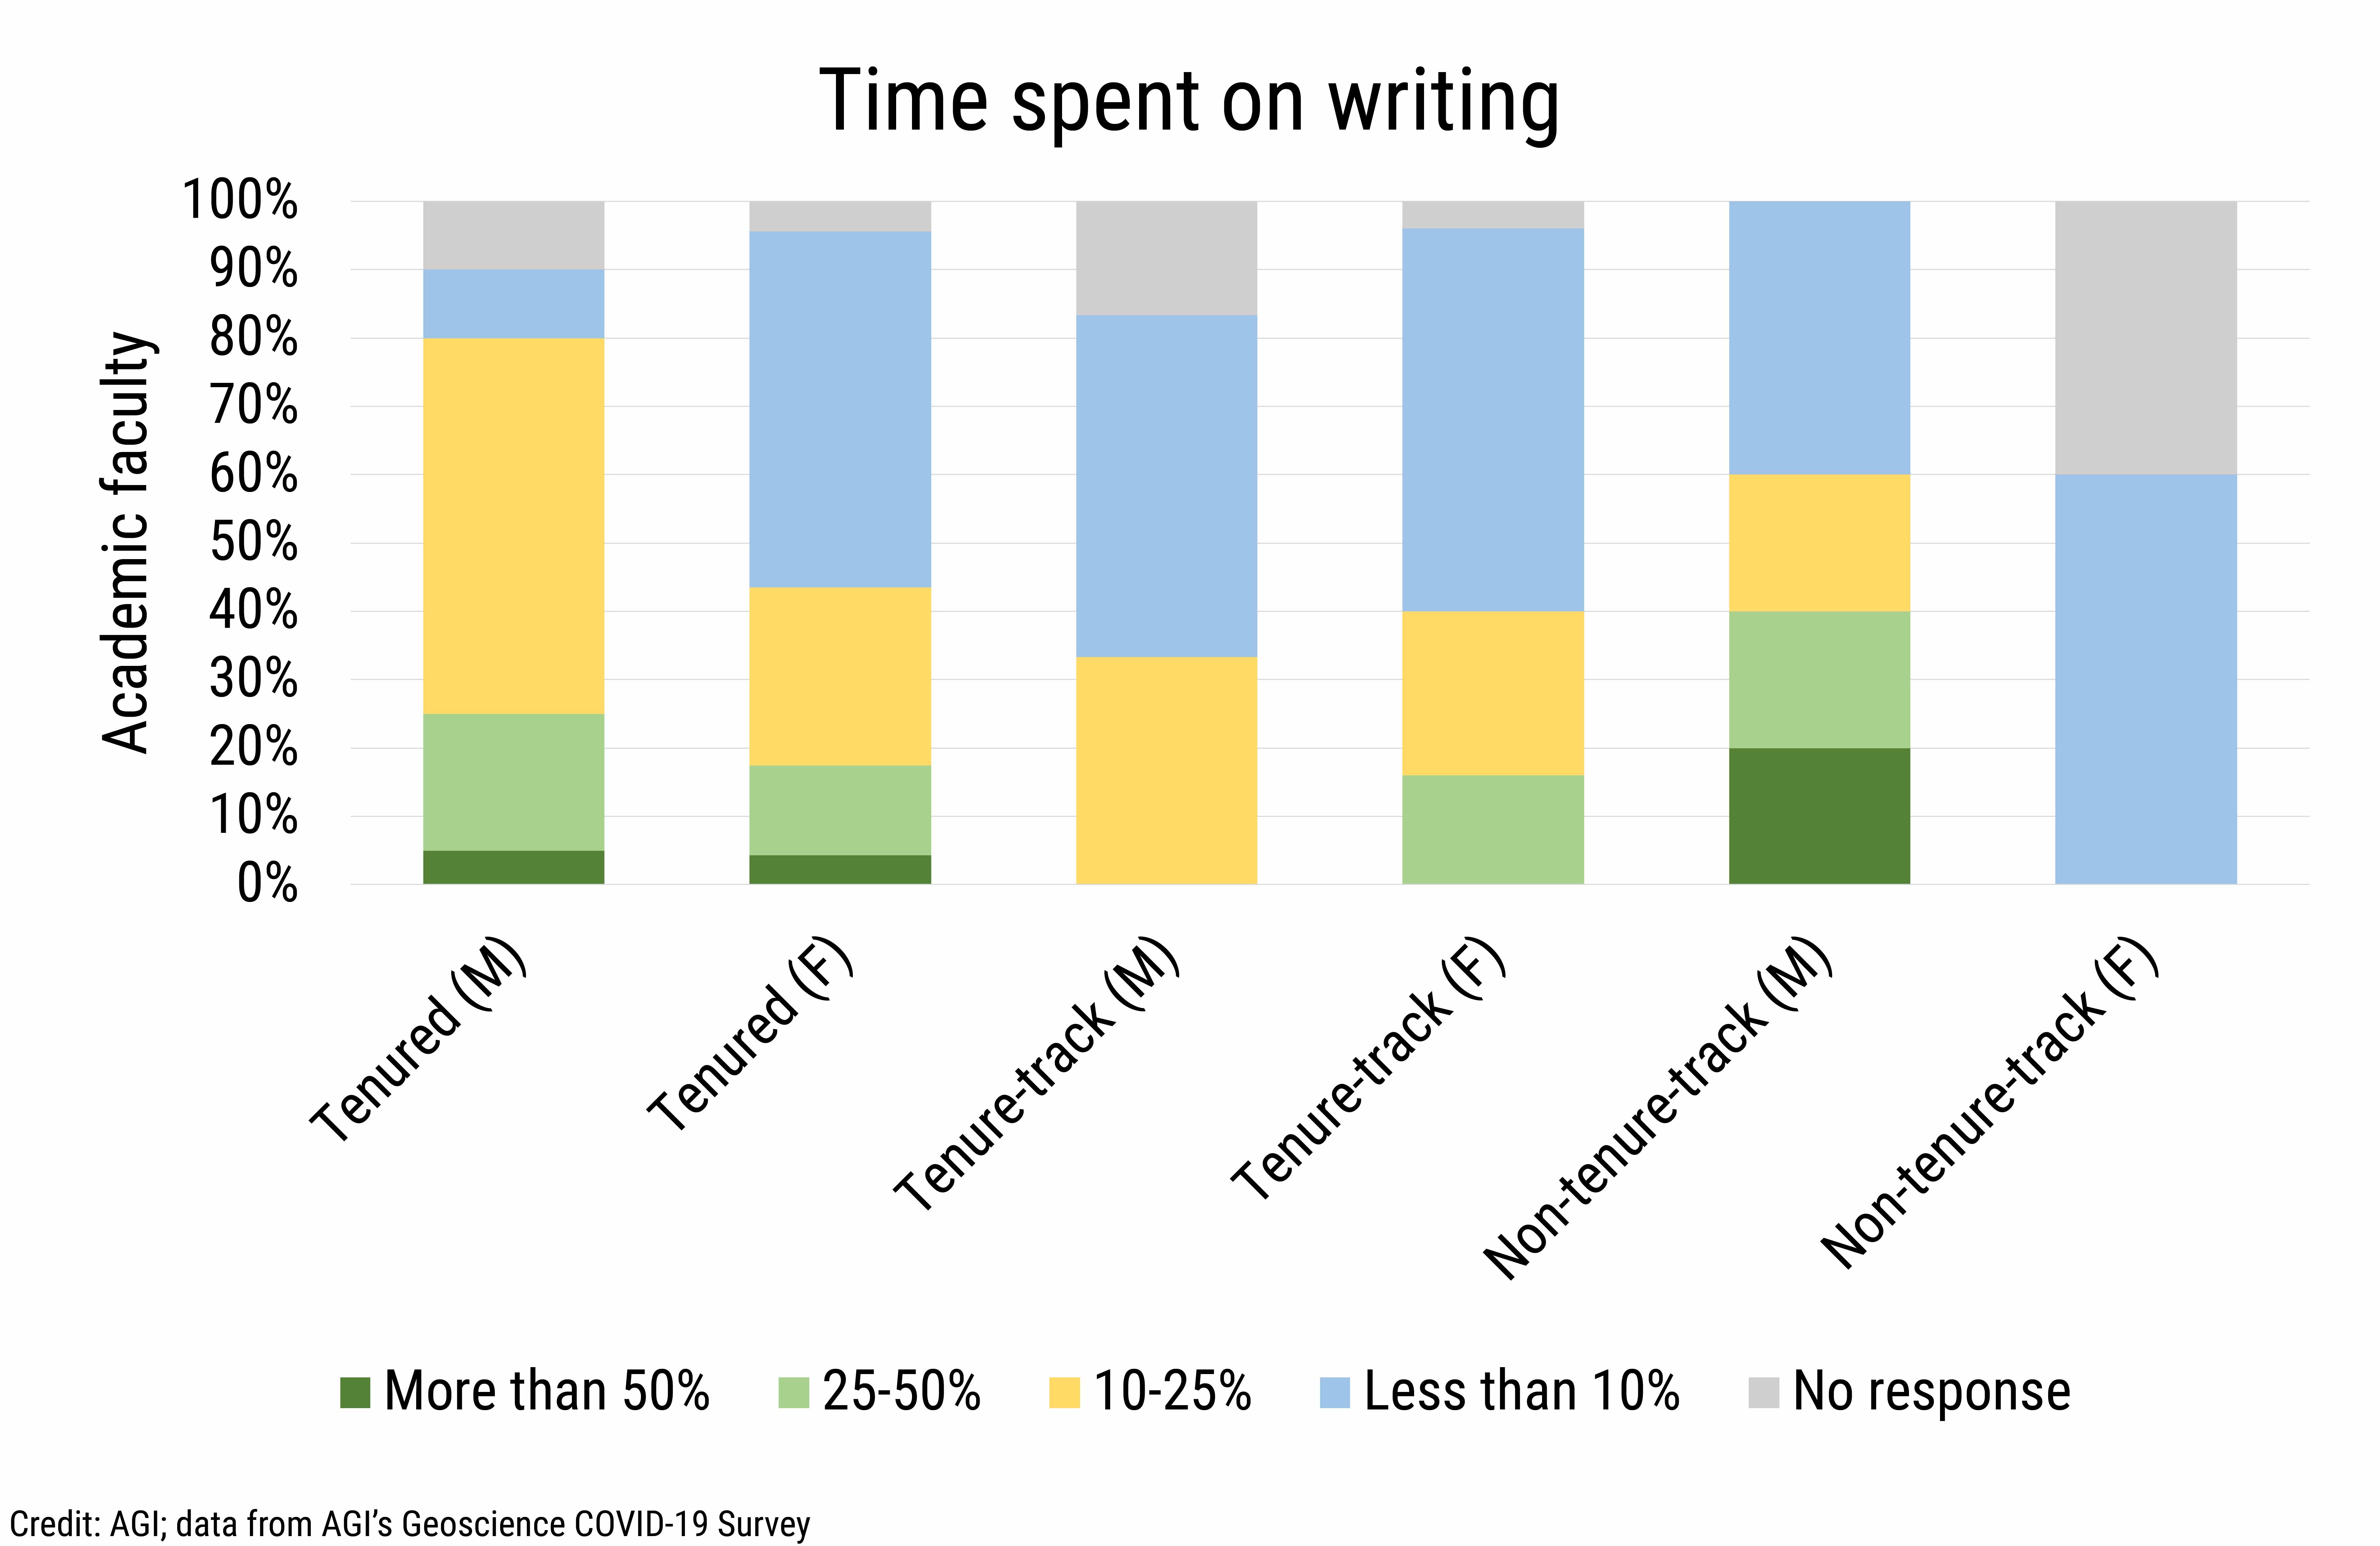 DB_2021-019 chart 02: Time spent on writing (Credit: AGI; data from AGI&#039;s Geoscience COVID-19 Survey)